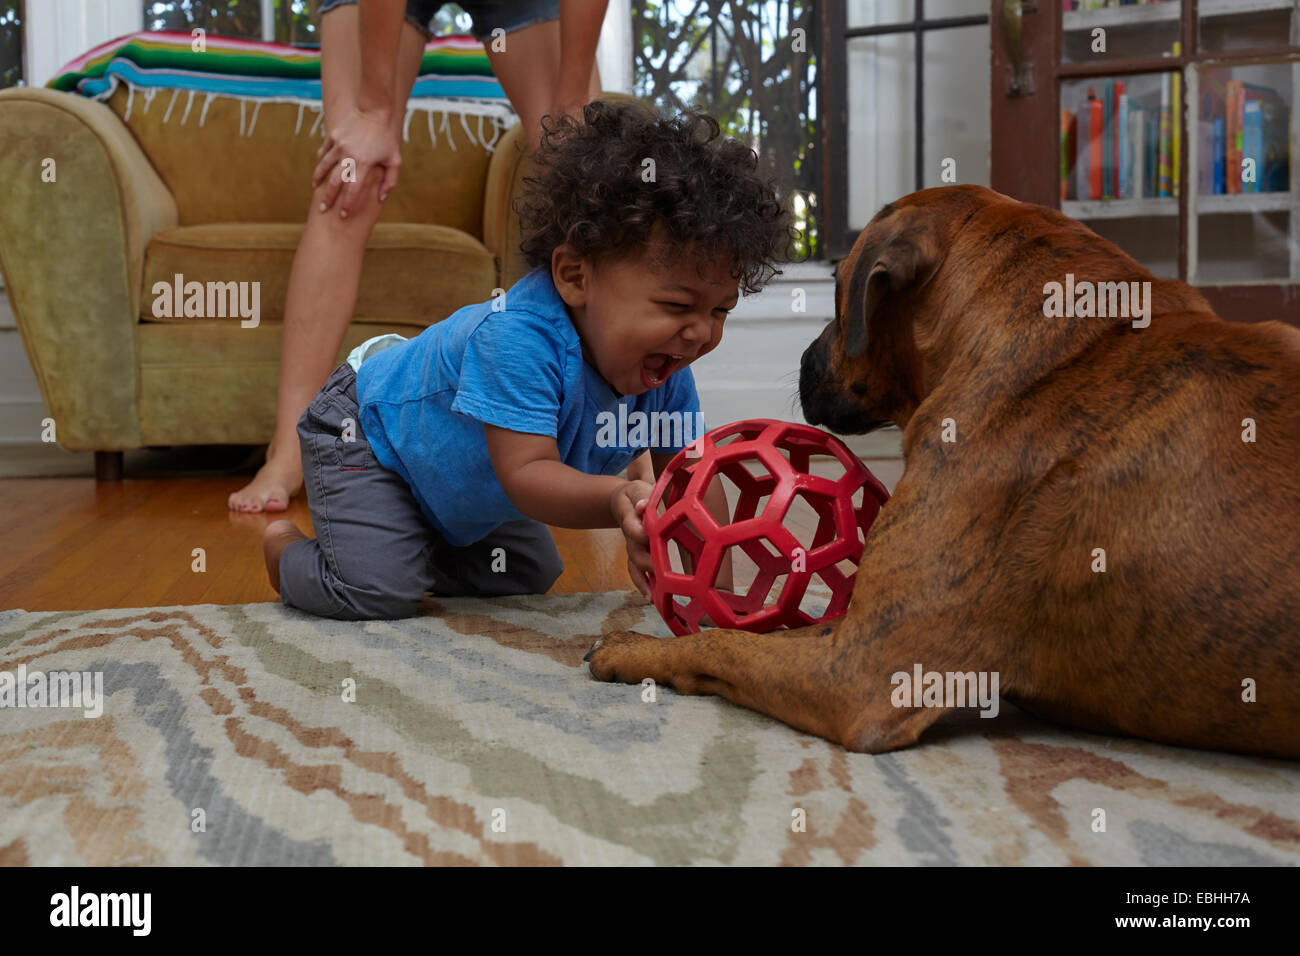 Male toddler playing with dog on sitting room floor Stock Photo